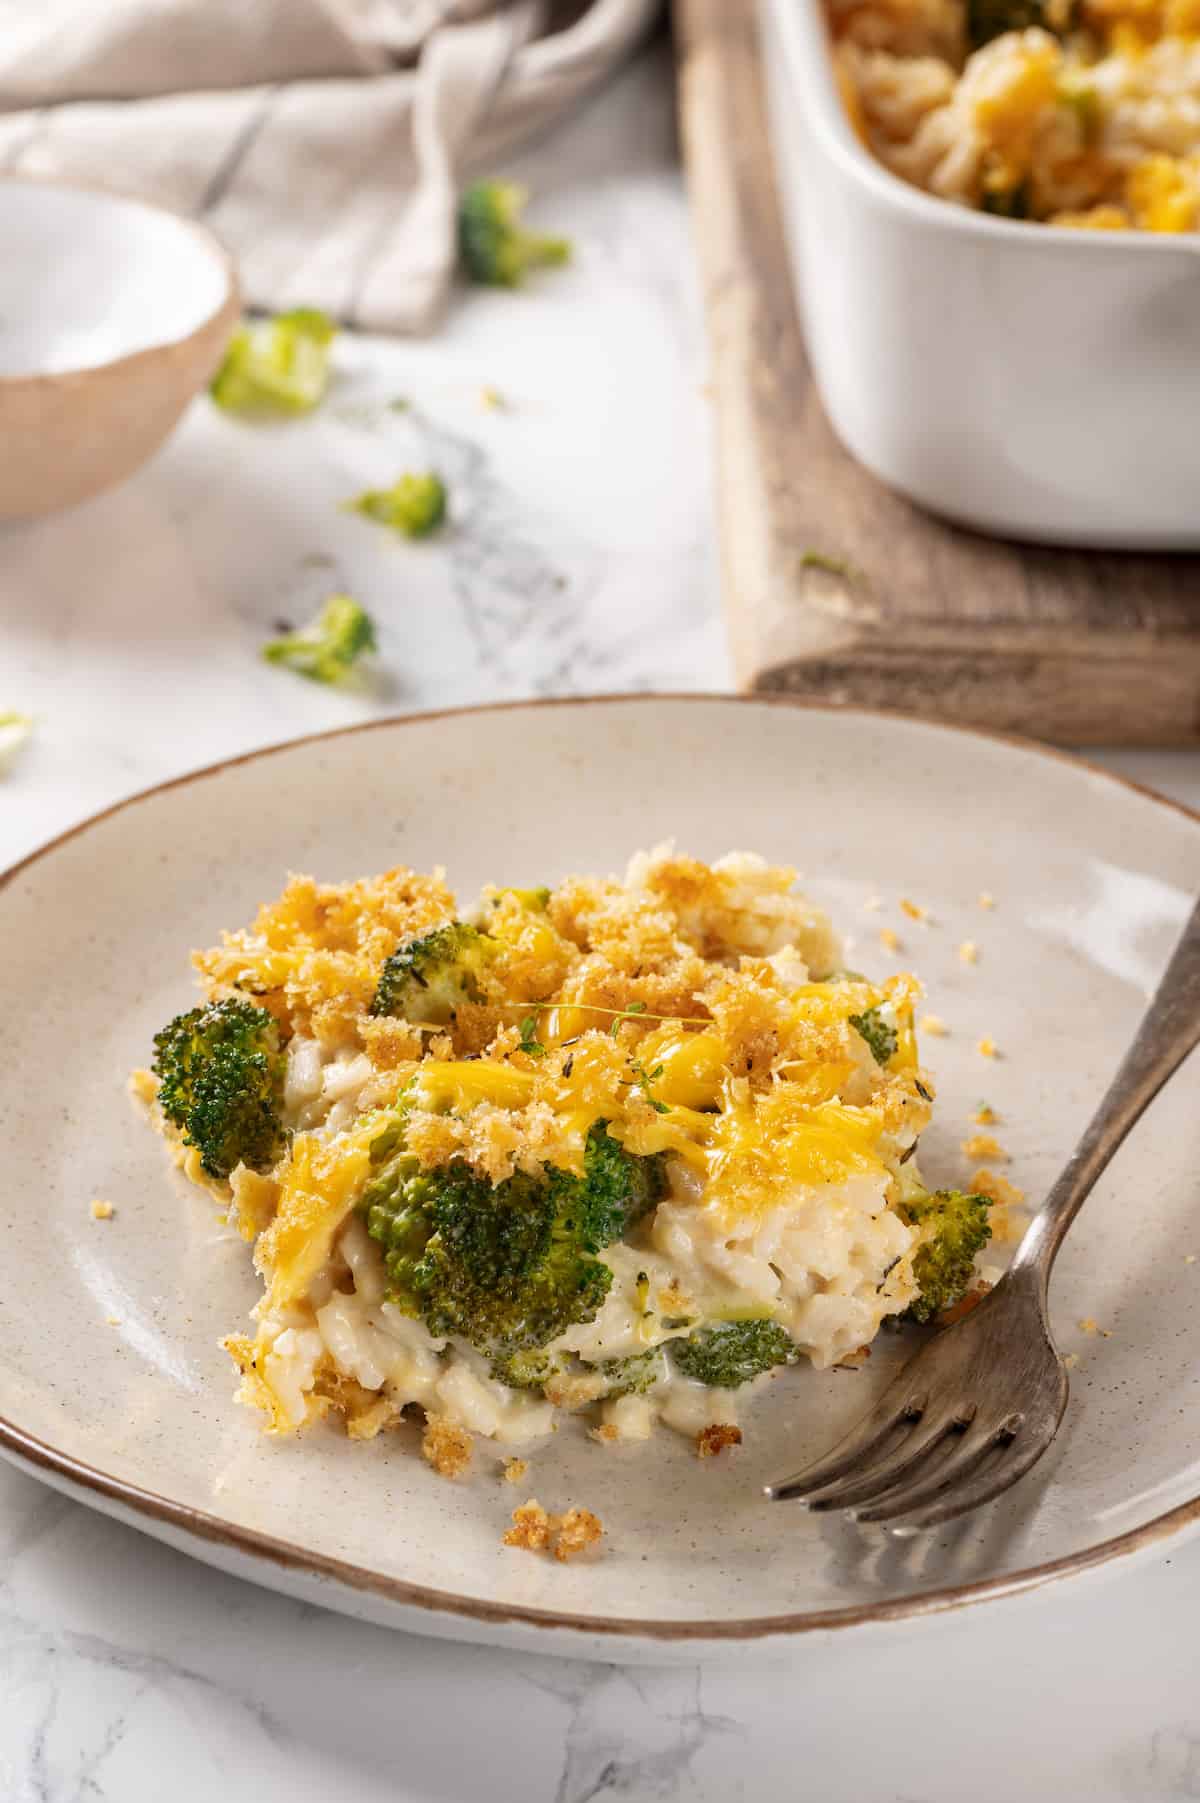 Plate with broccoli cheese rice casserole and fork